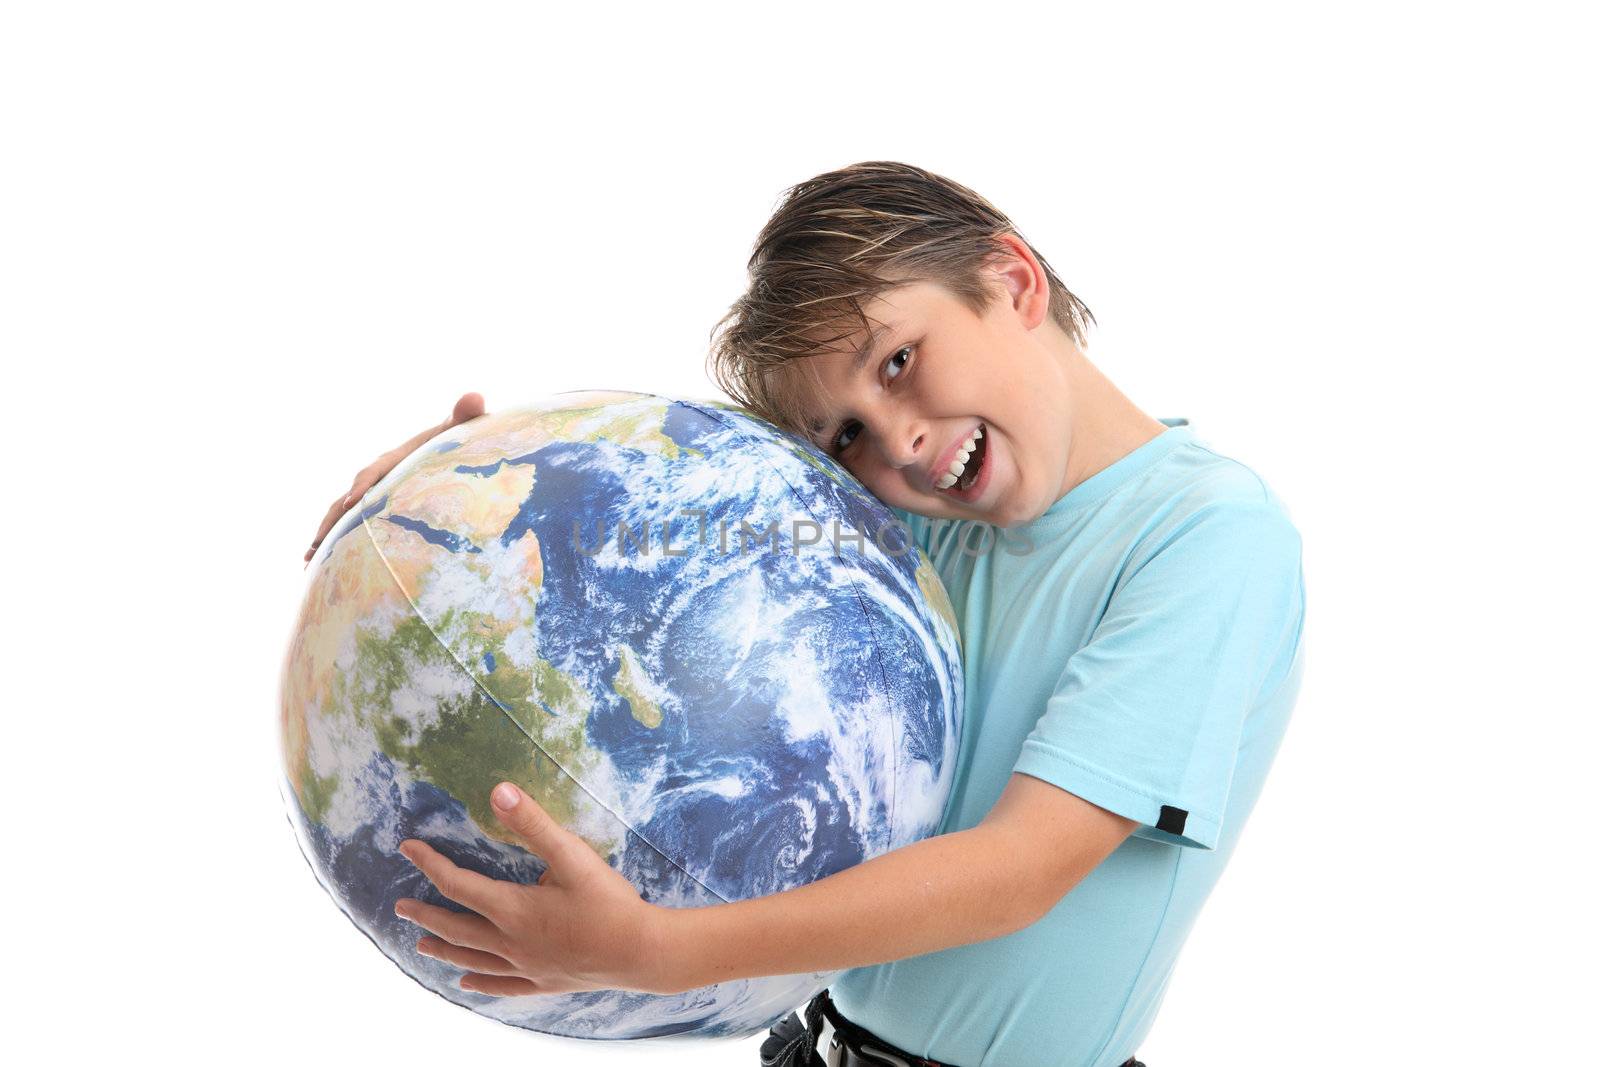 A young boy with his hands hugging the world earth ball.  He is leaning his head into the earth affectionately and smiling.  Concept environmental protection, world care, travel eco-tourism, etc